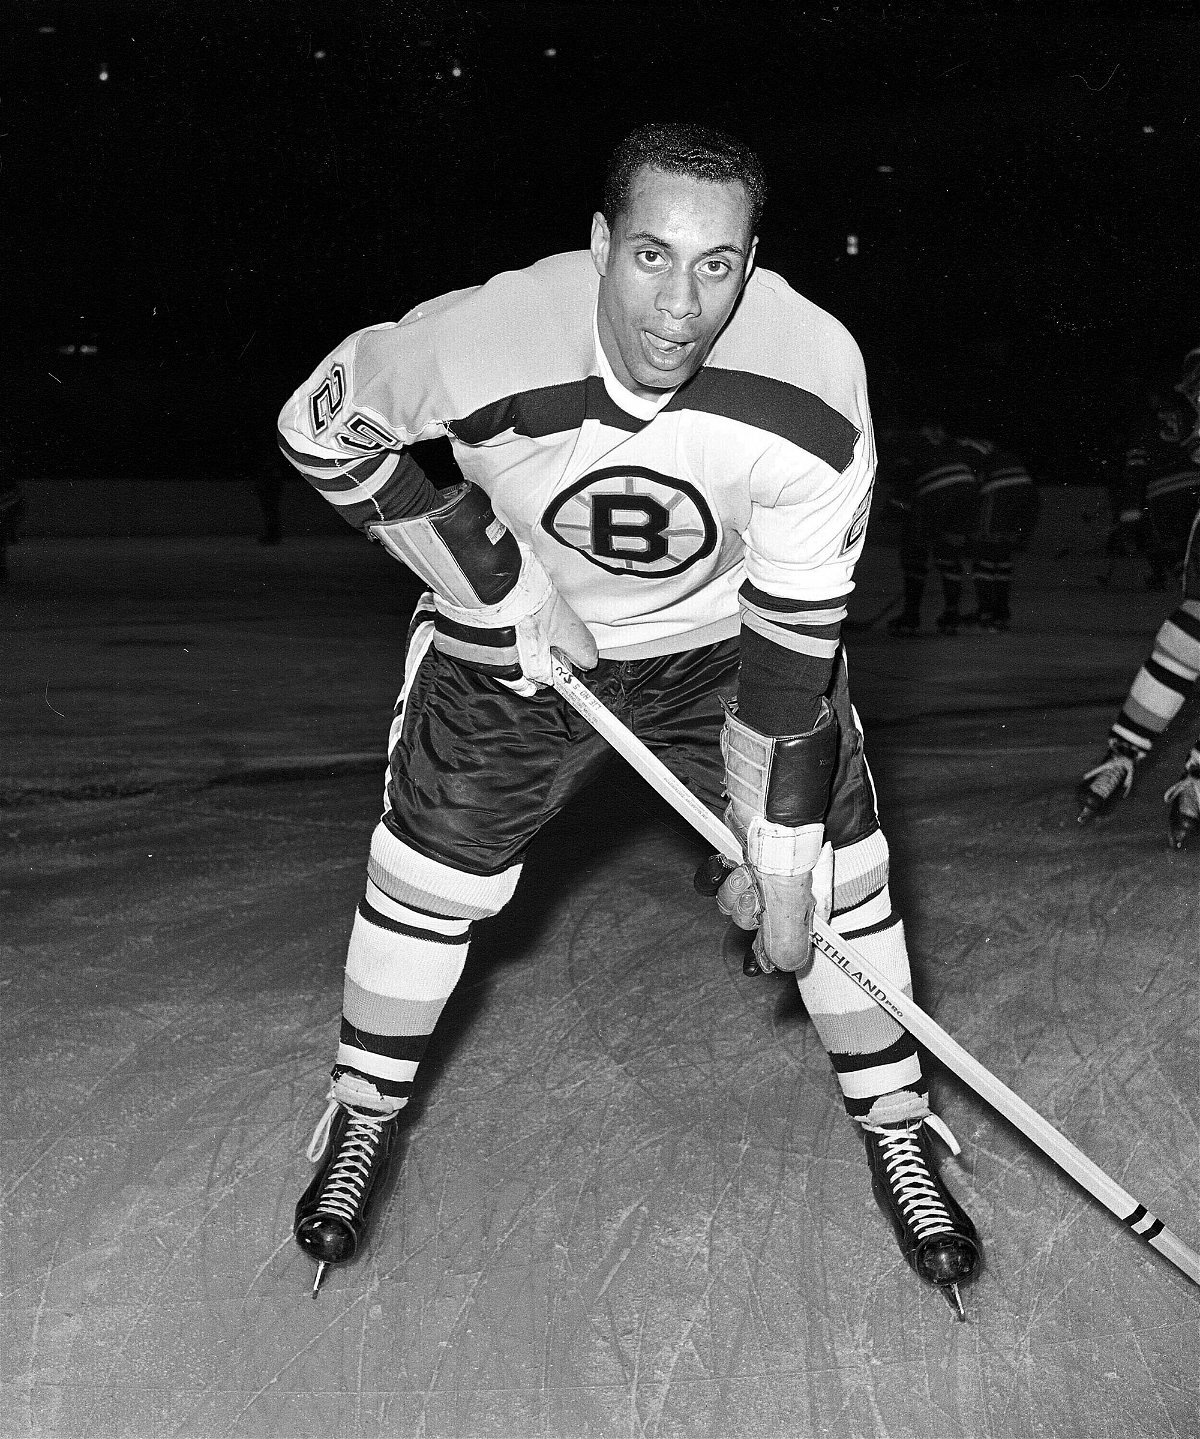 <i>AP</i><br/>The Boston Bruins are set to retire the jersey of the first Black player in the NHL